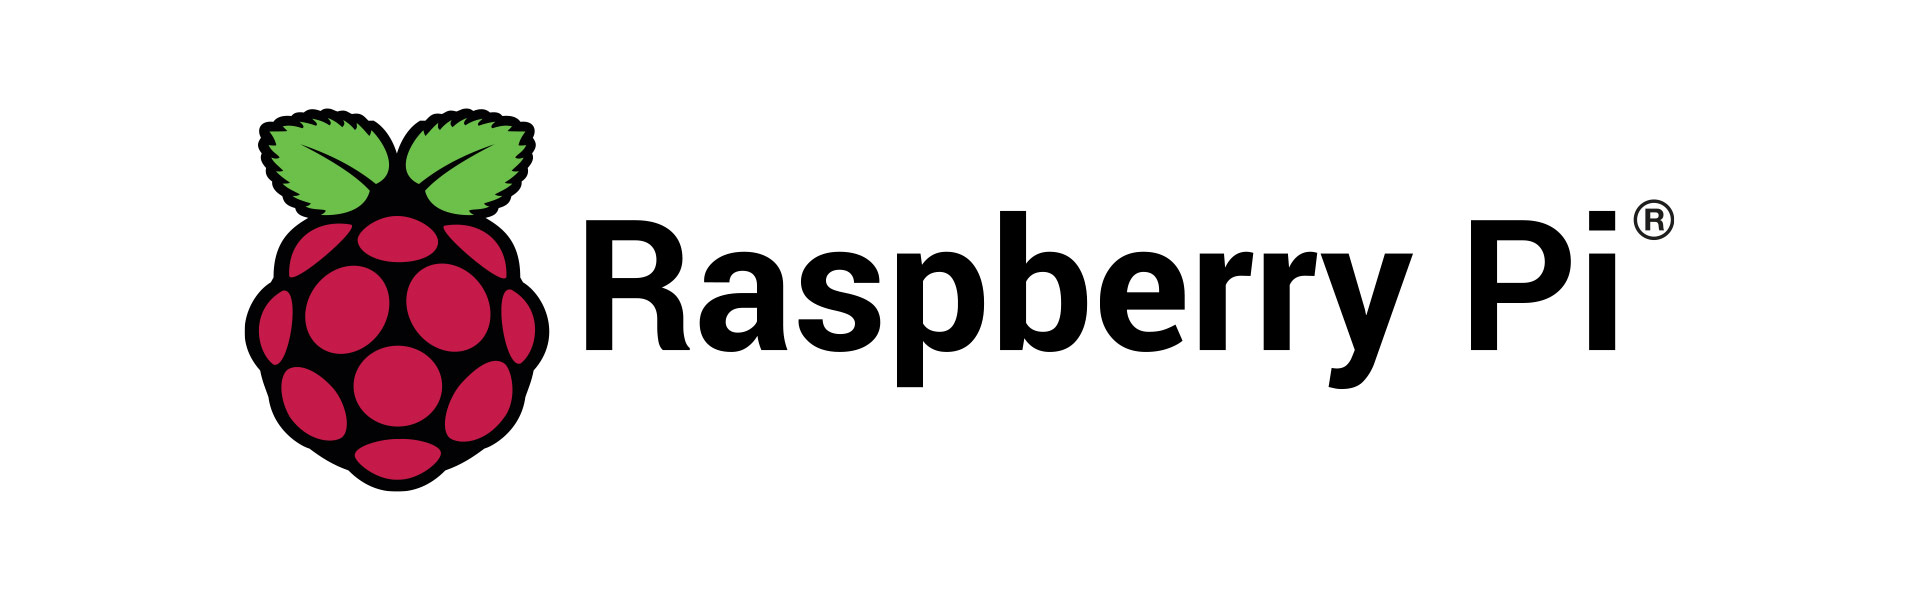 Experis names the Raspberry Pi Foundation as Charity Partner